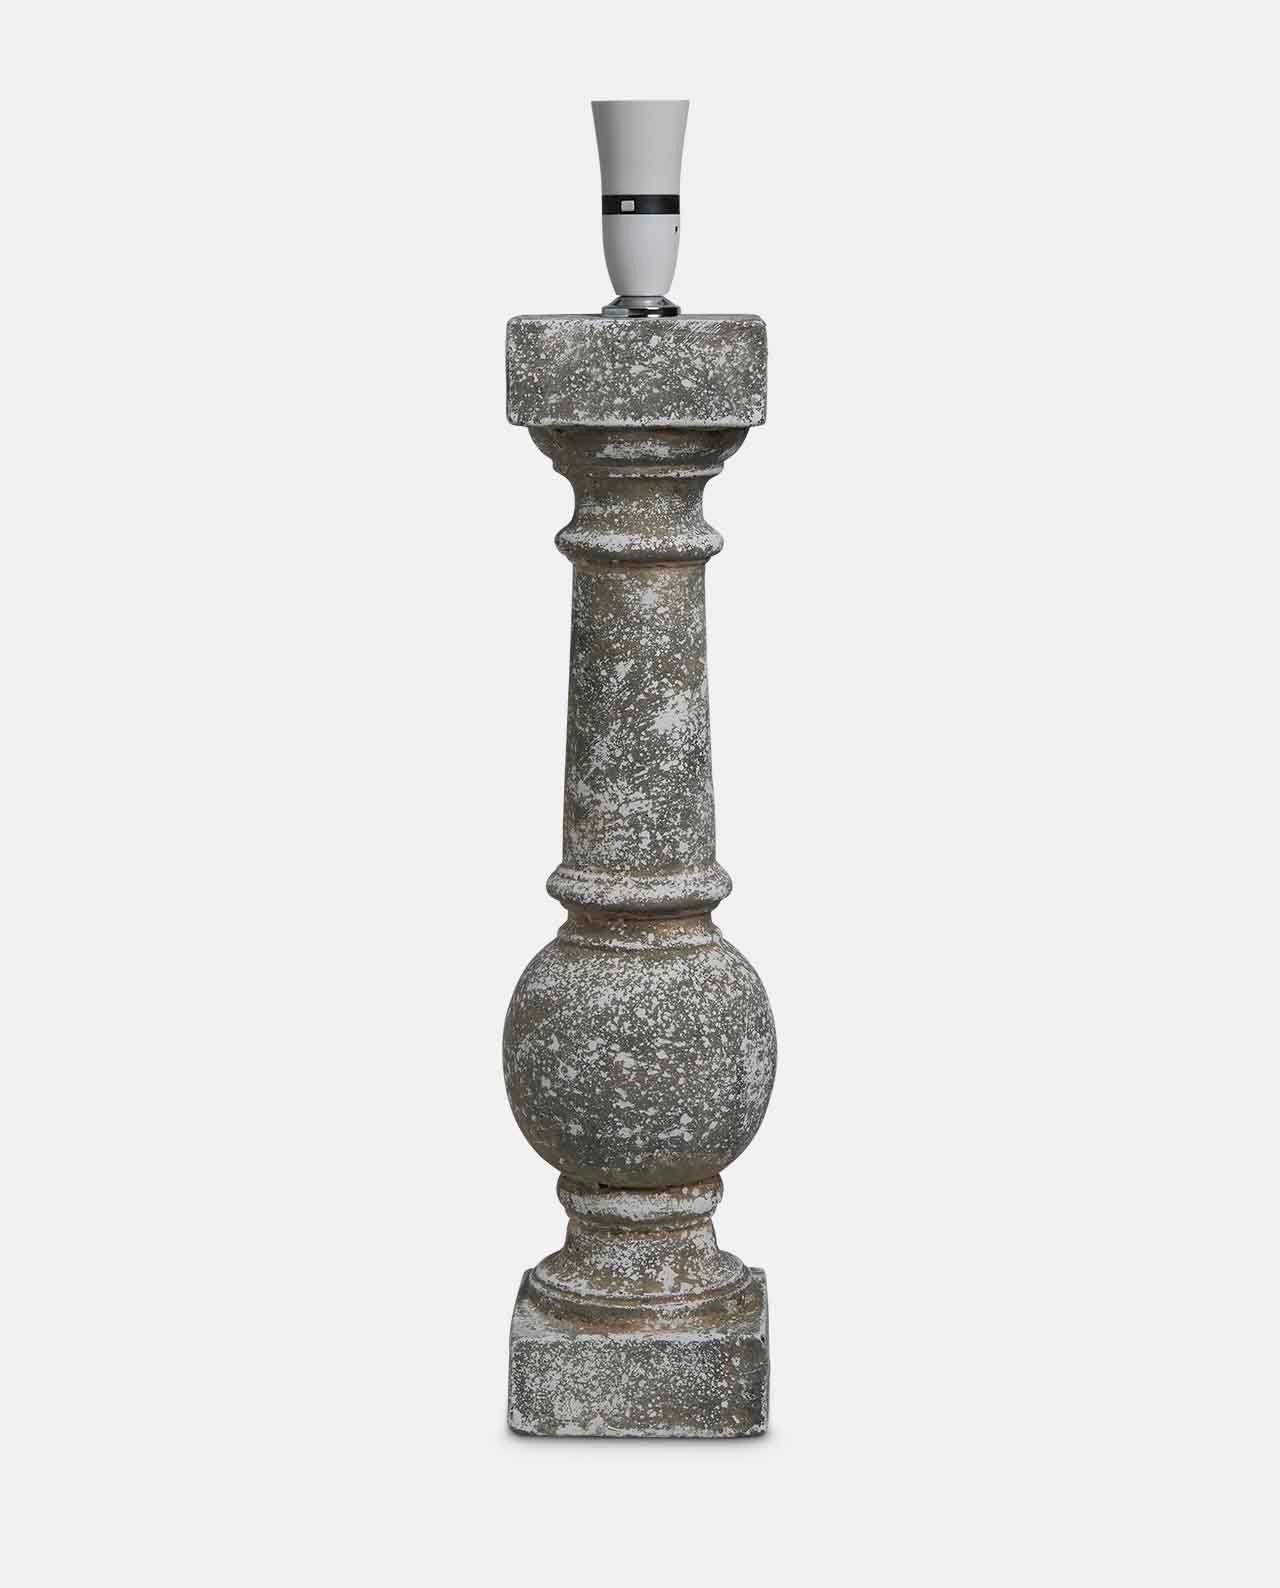 Tall Stone Lamp for sale - Woodcock and Cavendish